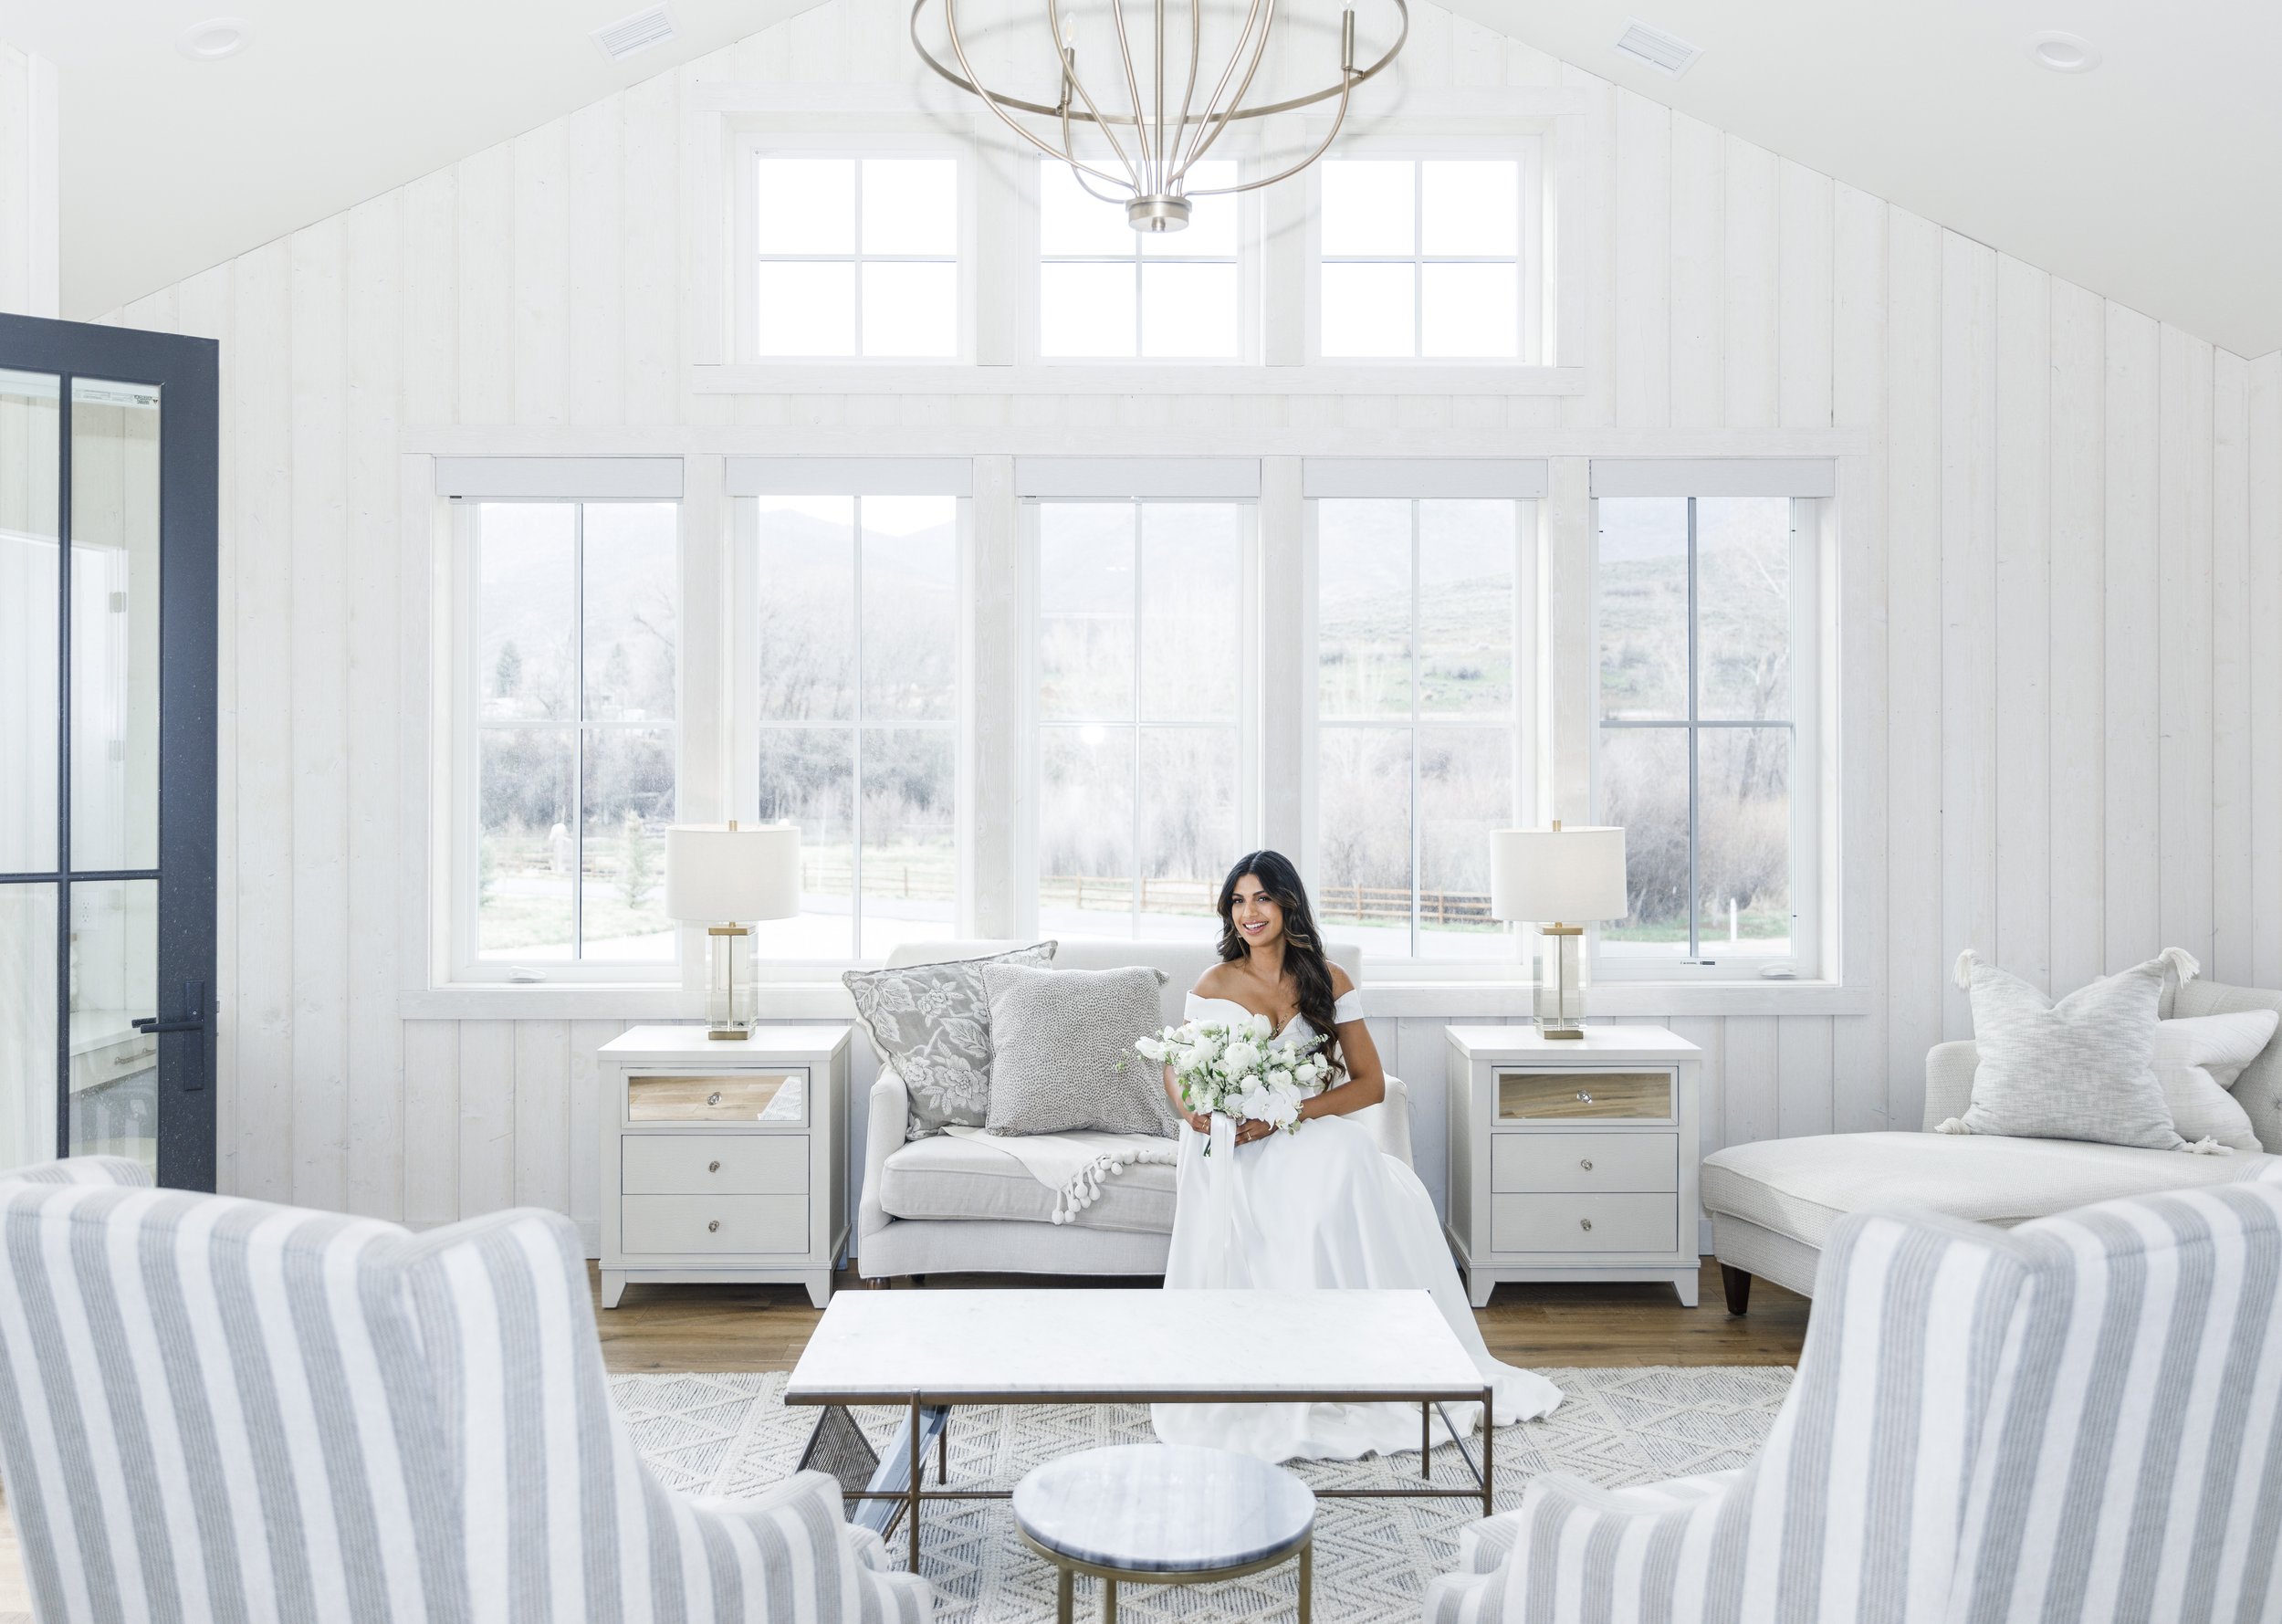  A bride sits in an all-white bridal room on her wedding day captured by Savanna Richardson Photography. high-end wedding photographer #SavannaRichardsonPhotography #SavannaRichardsonWeddings #bridals #formals #bouquets #Utahweddingphotographers 